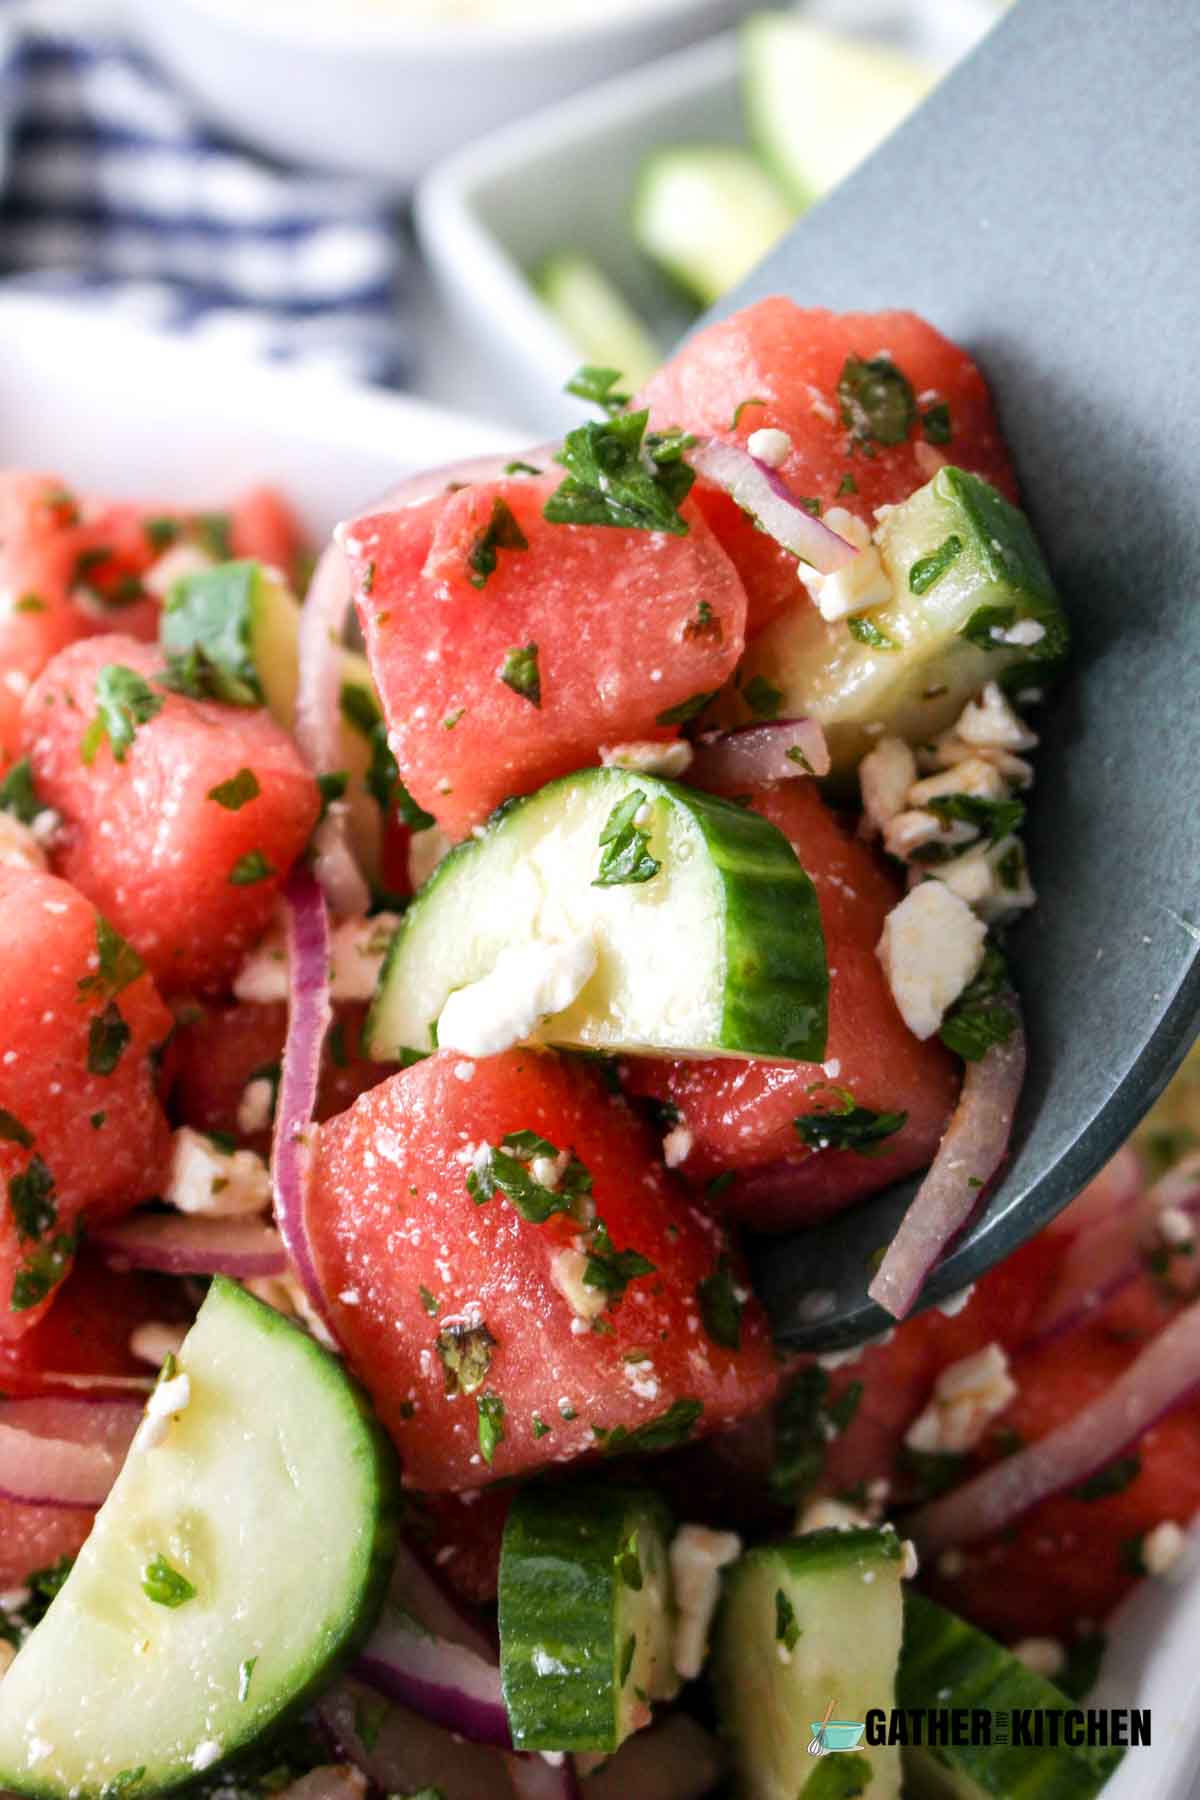 Closeup of a spoon holding watermelon salad - you can see watermelon, pieces of red onion, chopped cucumbers with herbs and feta sprinkled throughout.